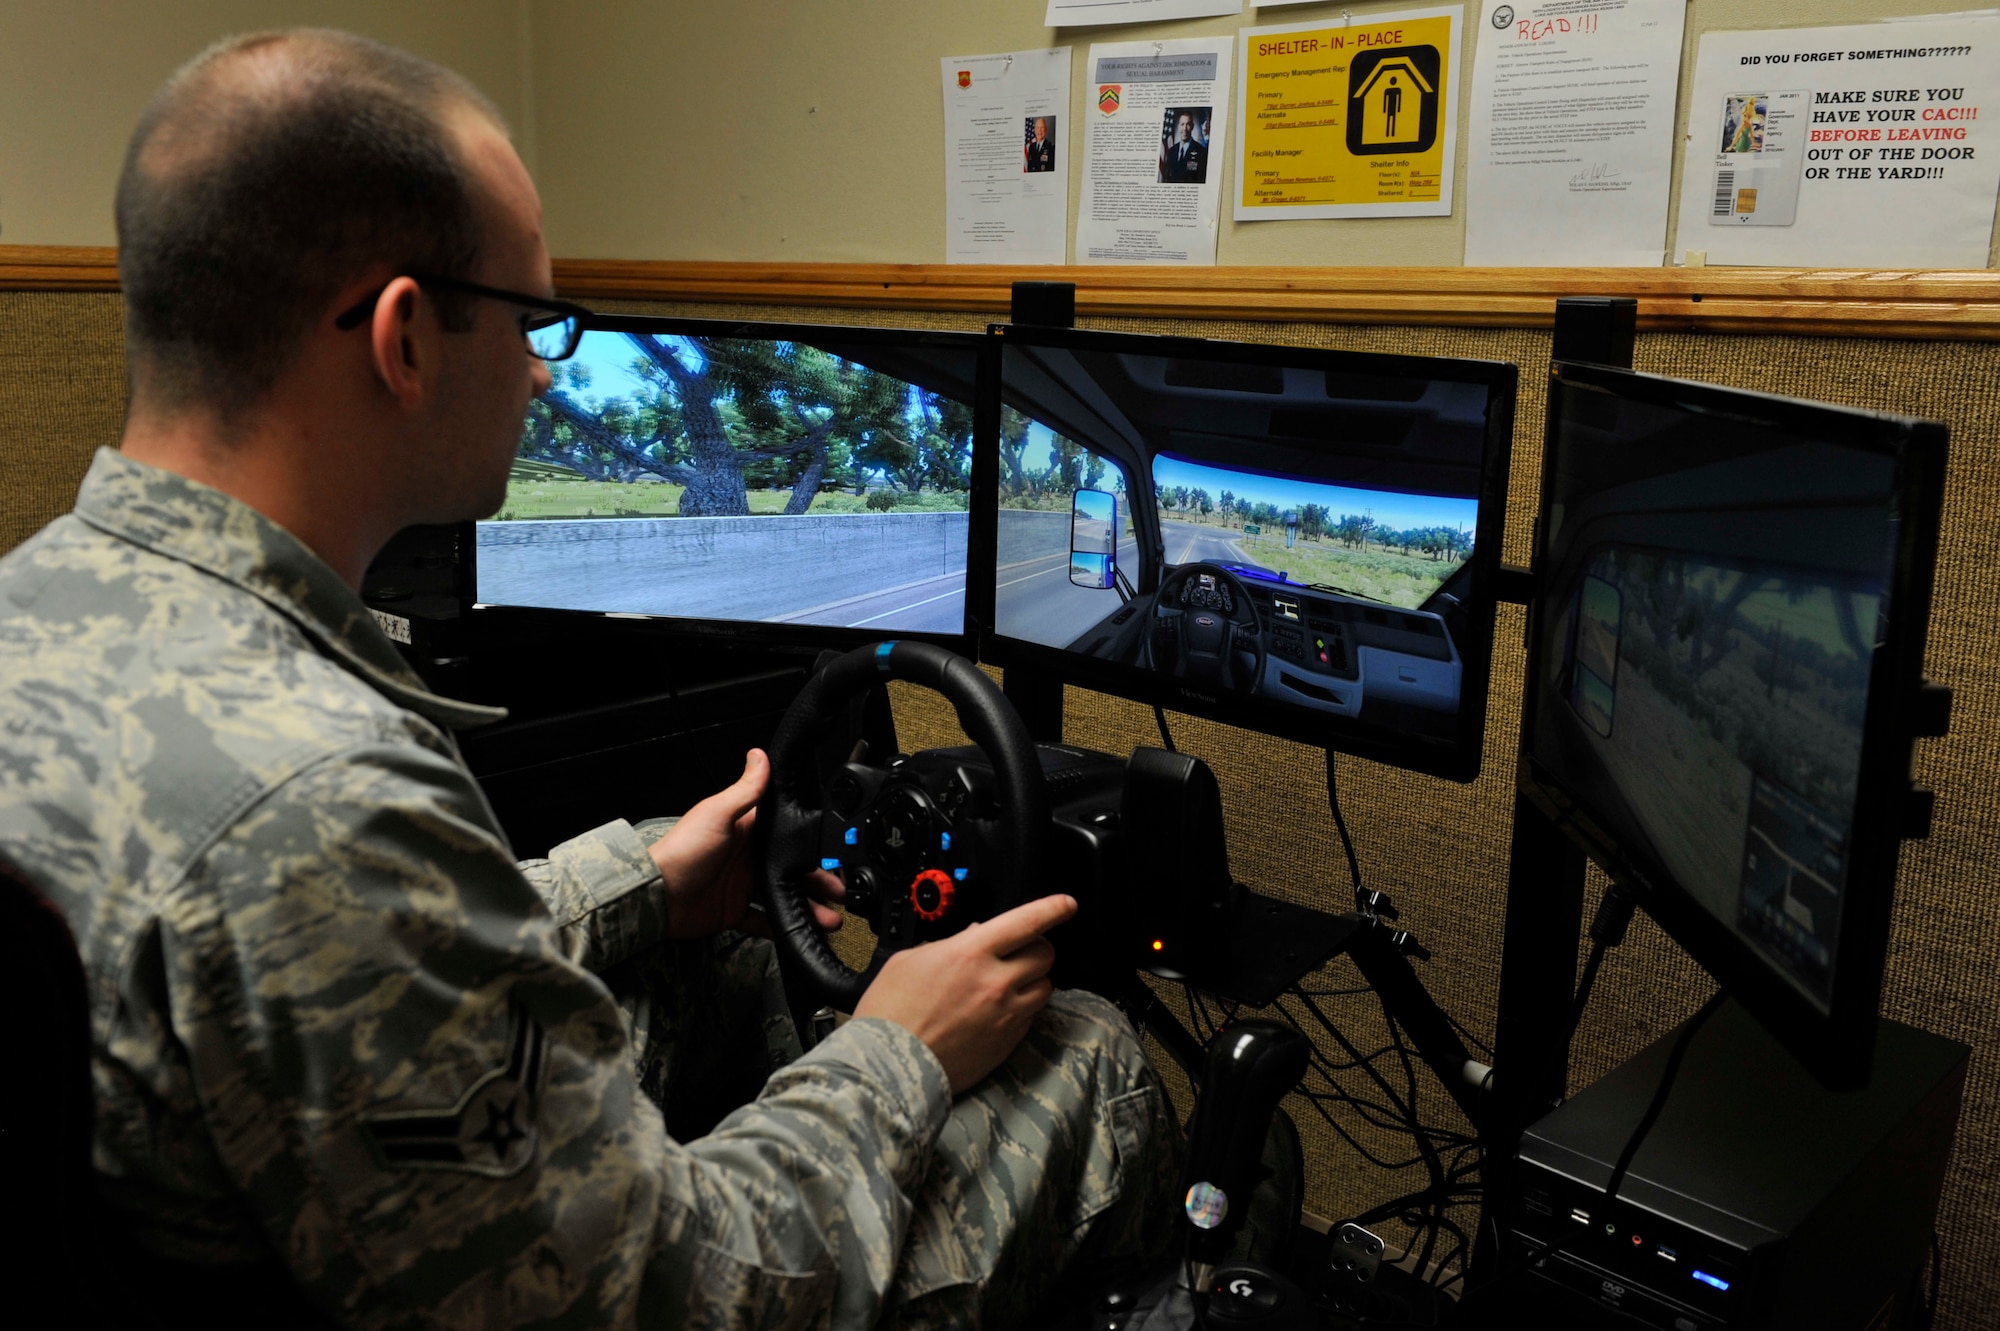 Airman 1st Class Larry Key, 56th Logistics Readiness Squadron vehicle operator dispatcher, trains on a driving simulator at Luke Air Force Base, Ariz., March 6, 2018. The simulator helps Airmen practice their skills without safety risks. (U.S. Air Force Photo by Senior Airman Pedro Mota)